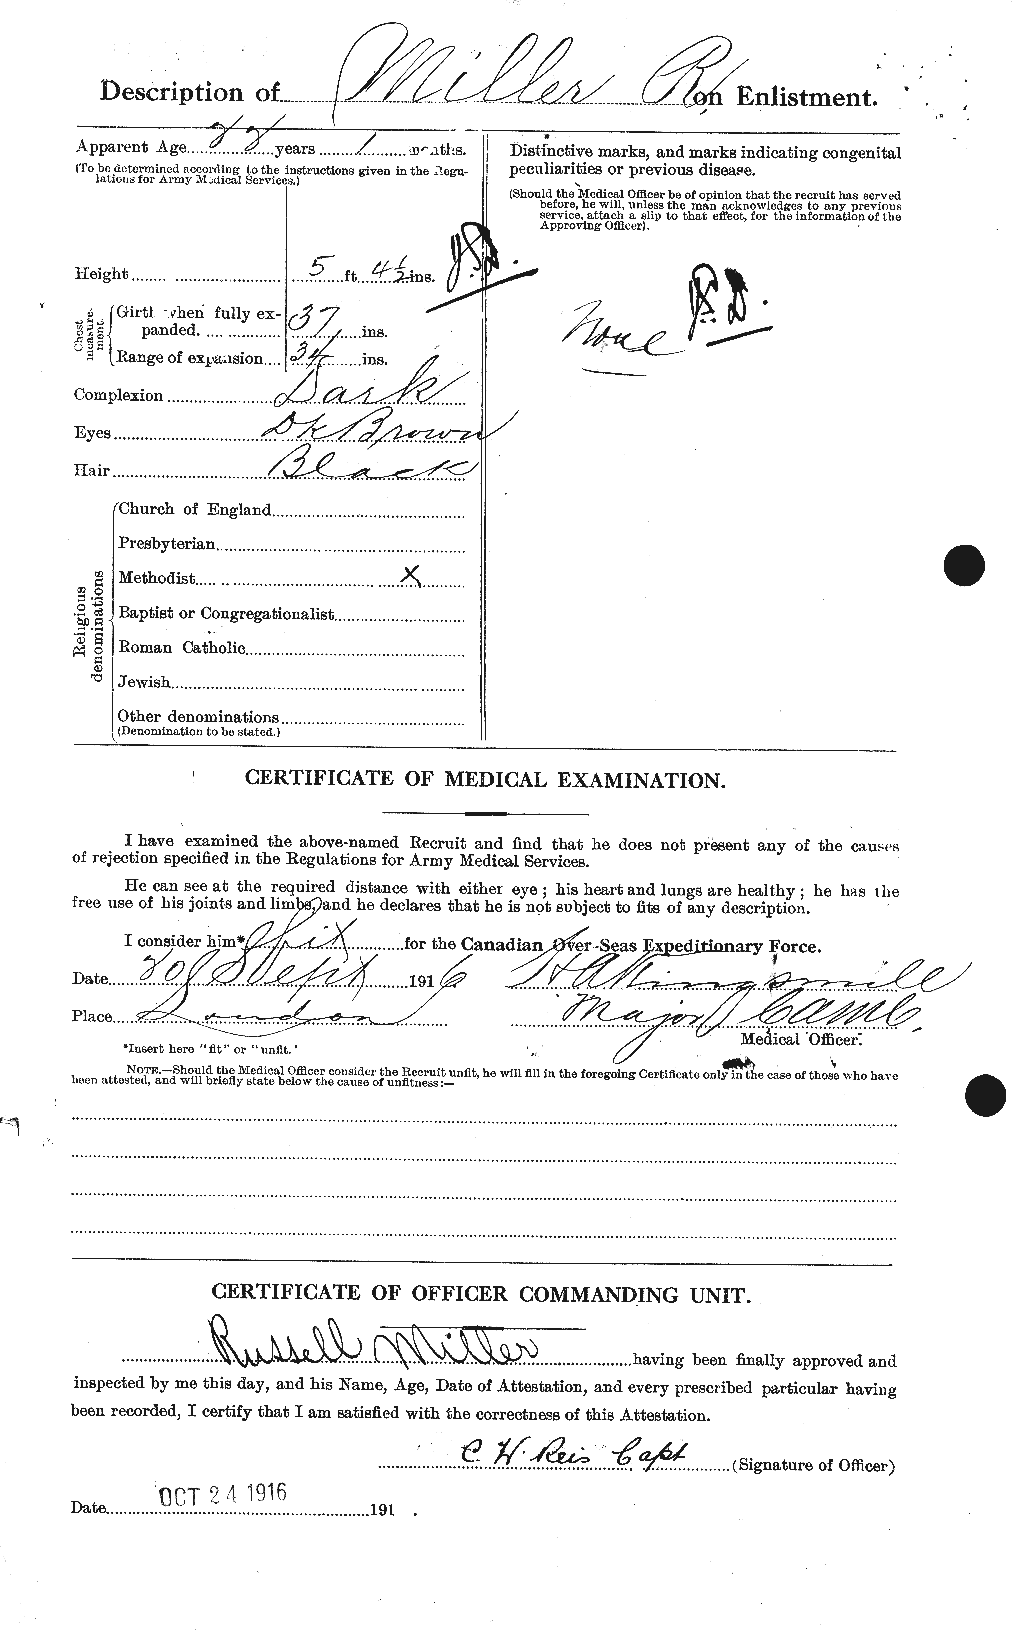 Personnel Records of the First World War - CEF 501596b